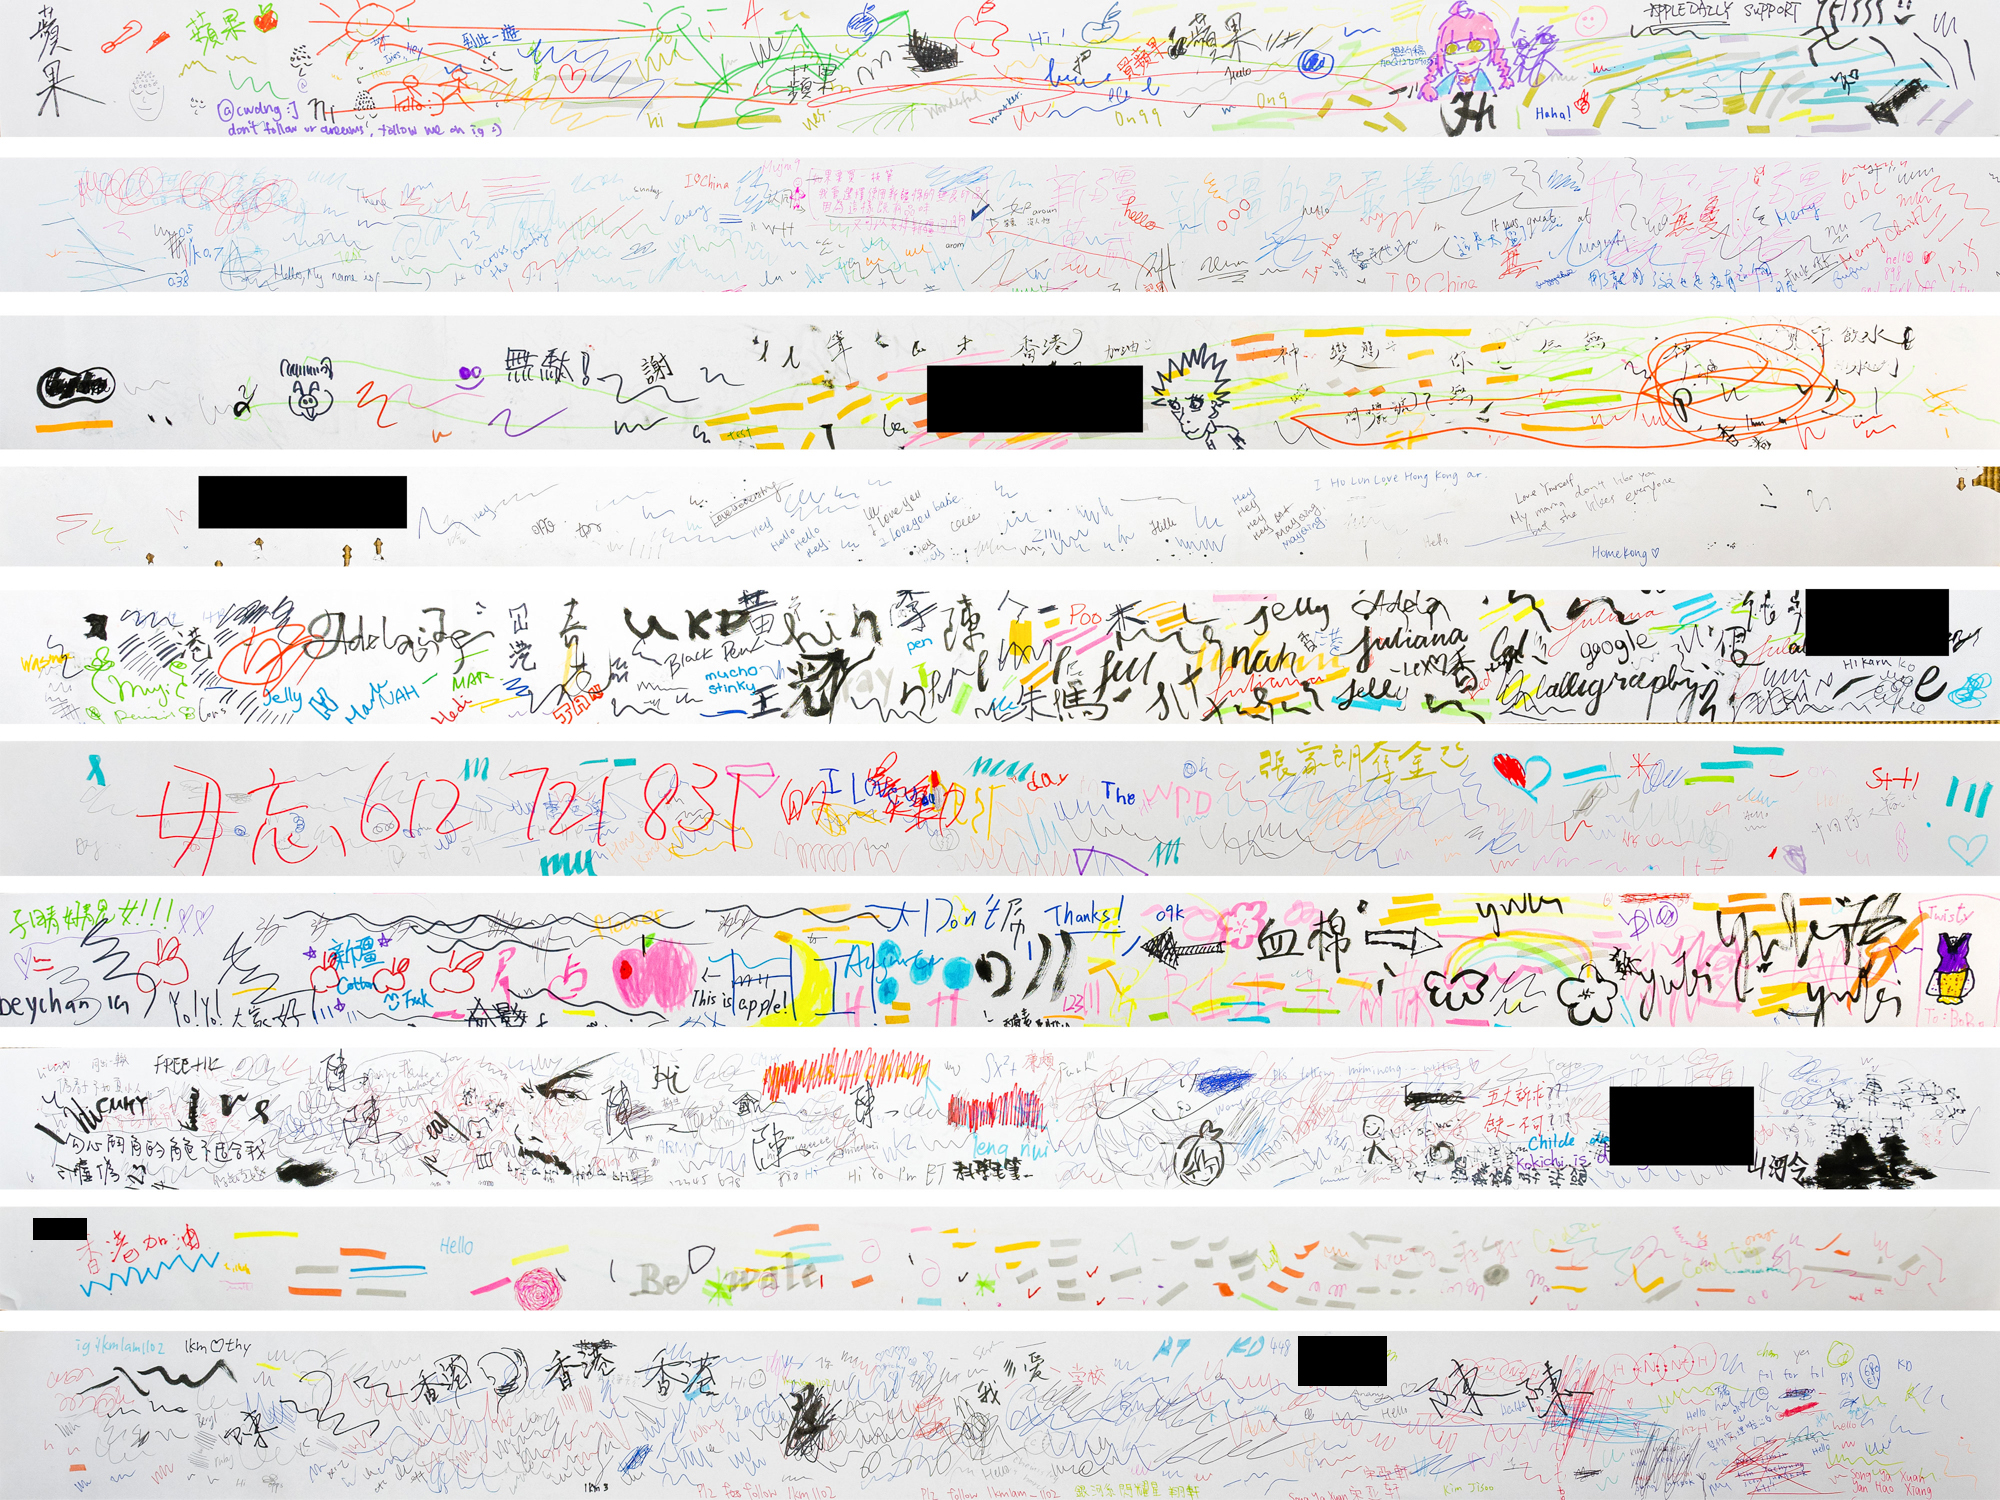 A collage of paper used for testing pens collected in 2019 at a major stationery store during the pro-democracy movement. During the protests, people filled these papers with slogans associated with the democracy movement and Hong Kong independence. The papers served as a small public dialogue. Since then, publicly uttering or displaying some of the words that appear in Kwok’s photographs has become punishable under Hong Kong’s National Security Law. Kwok has covered these words with black boxes.